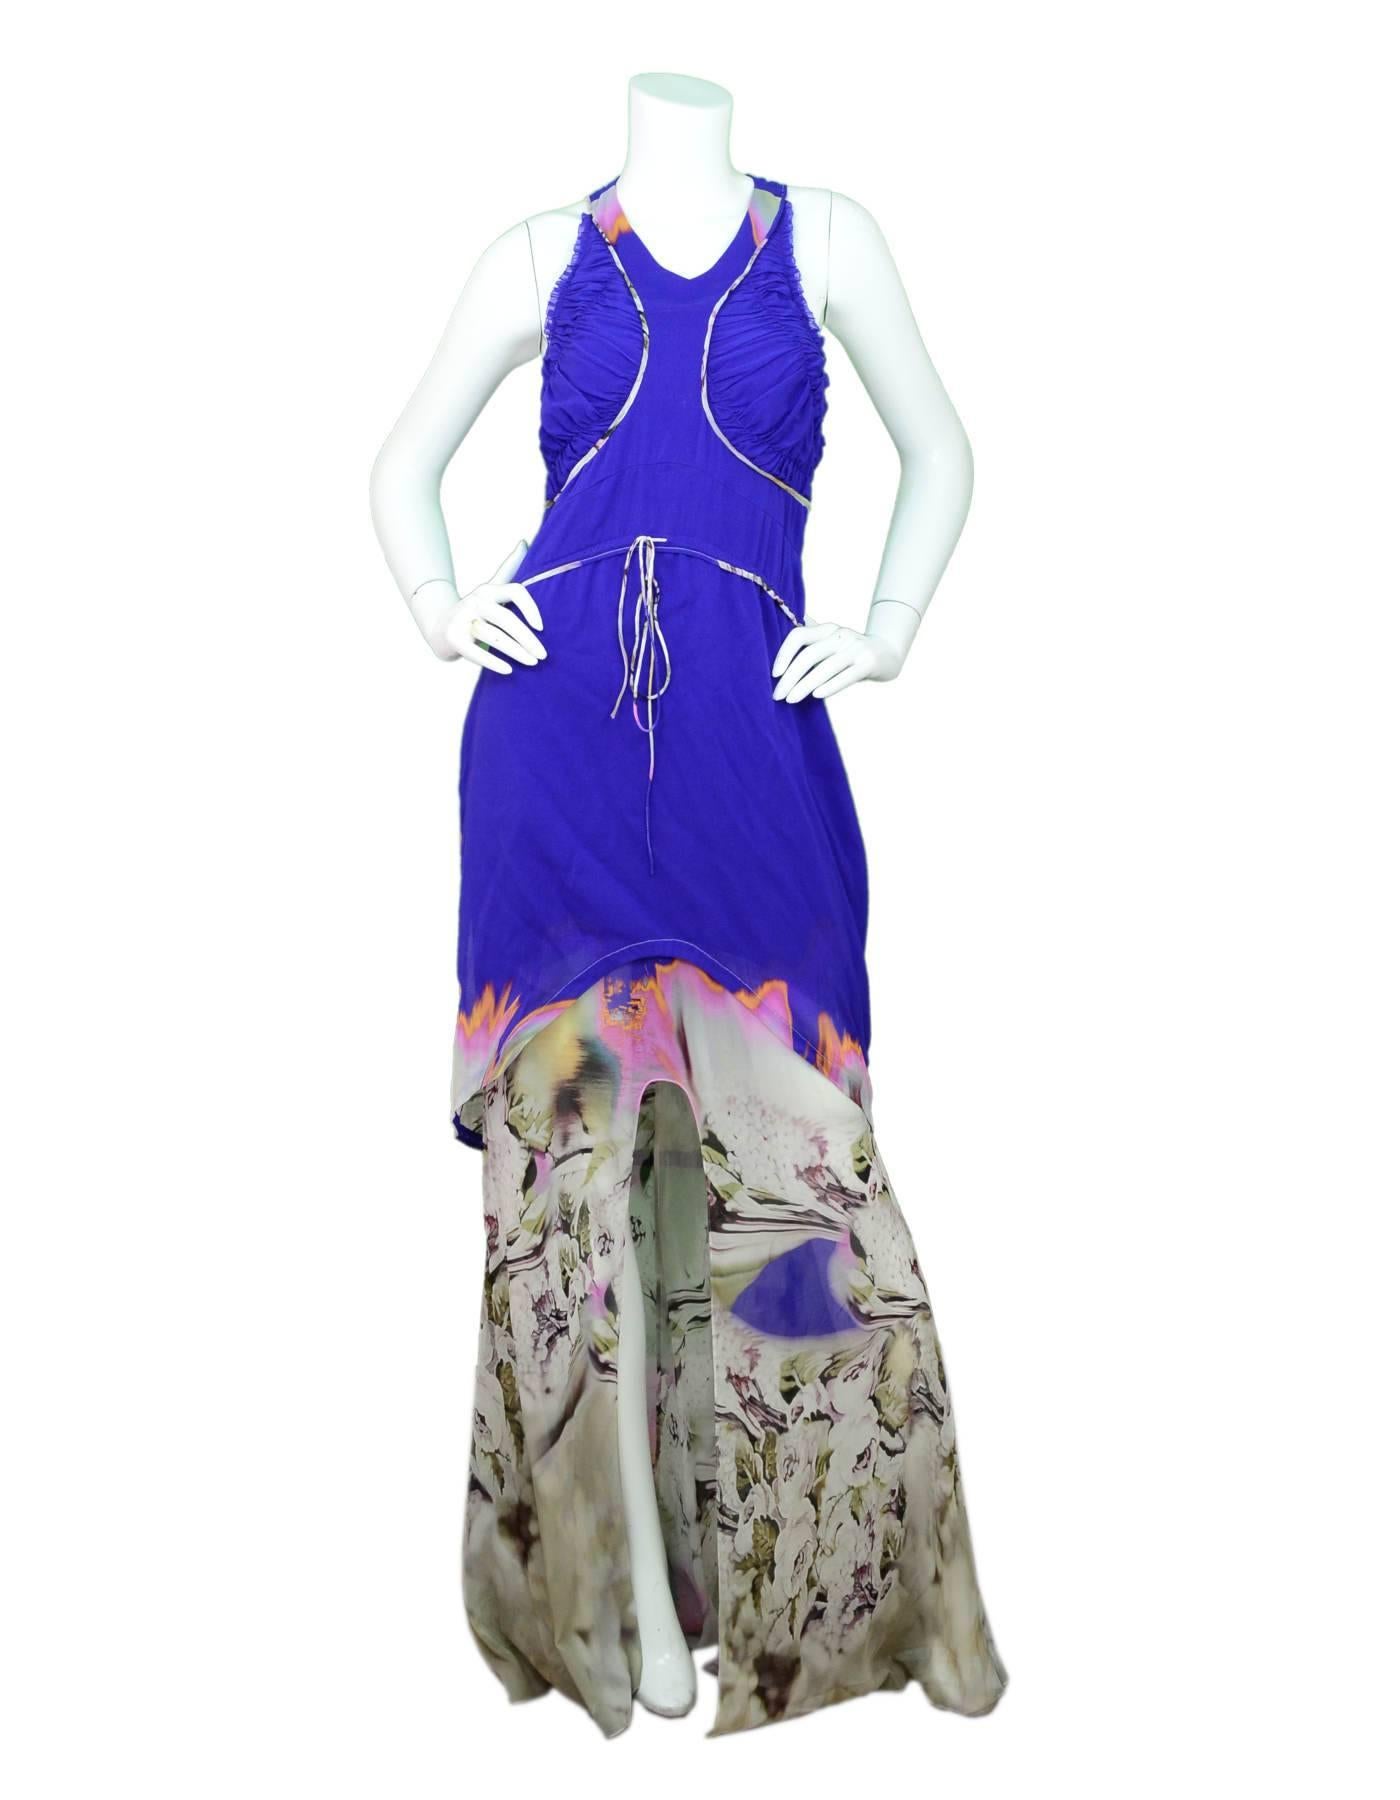 Vera Wang Silk Blue Hi-Low Gown Sz 8

Made In: China
Color: Royal blue, multi
Composition: 92% silk, 8% lycra
Lining: Blue lining
Closure/Opening: Back zip closure
Exterior Pockets: None
Interior Pockets: None
Overall Condition: Excellent pre-owned